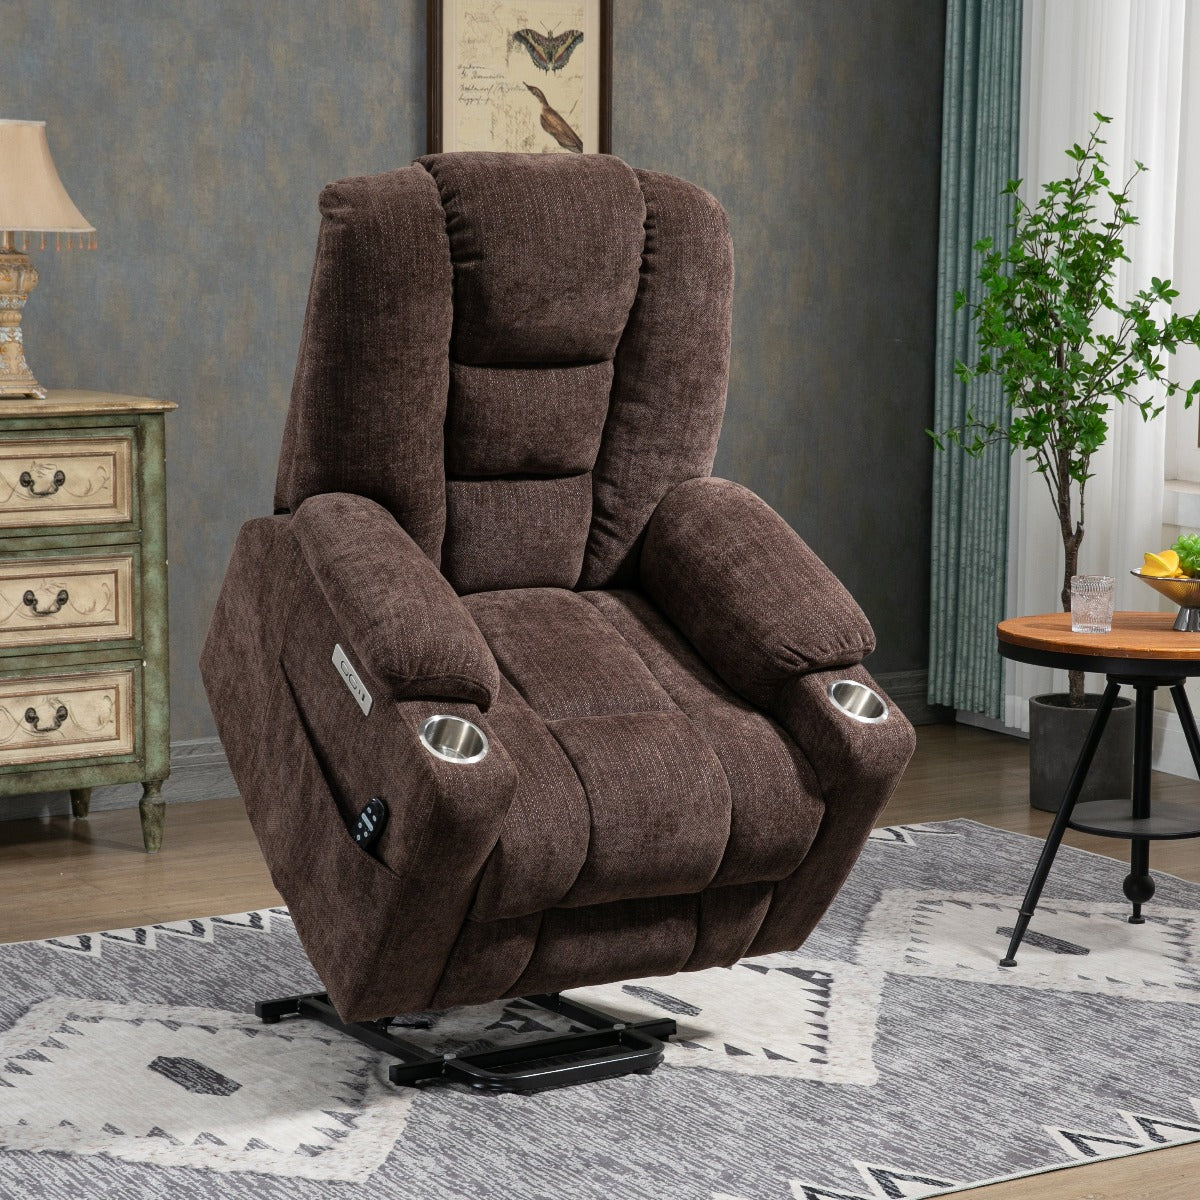 EMON's Power Lift Recliner, lifted - My Lift Chair